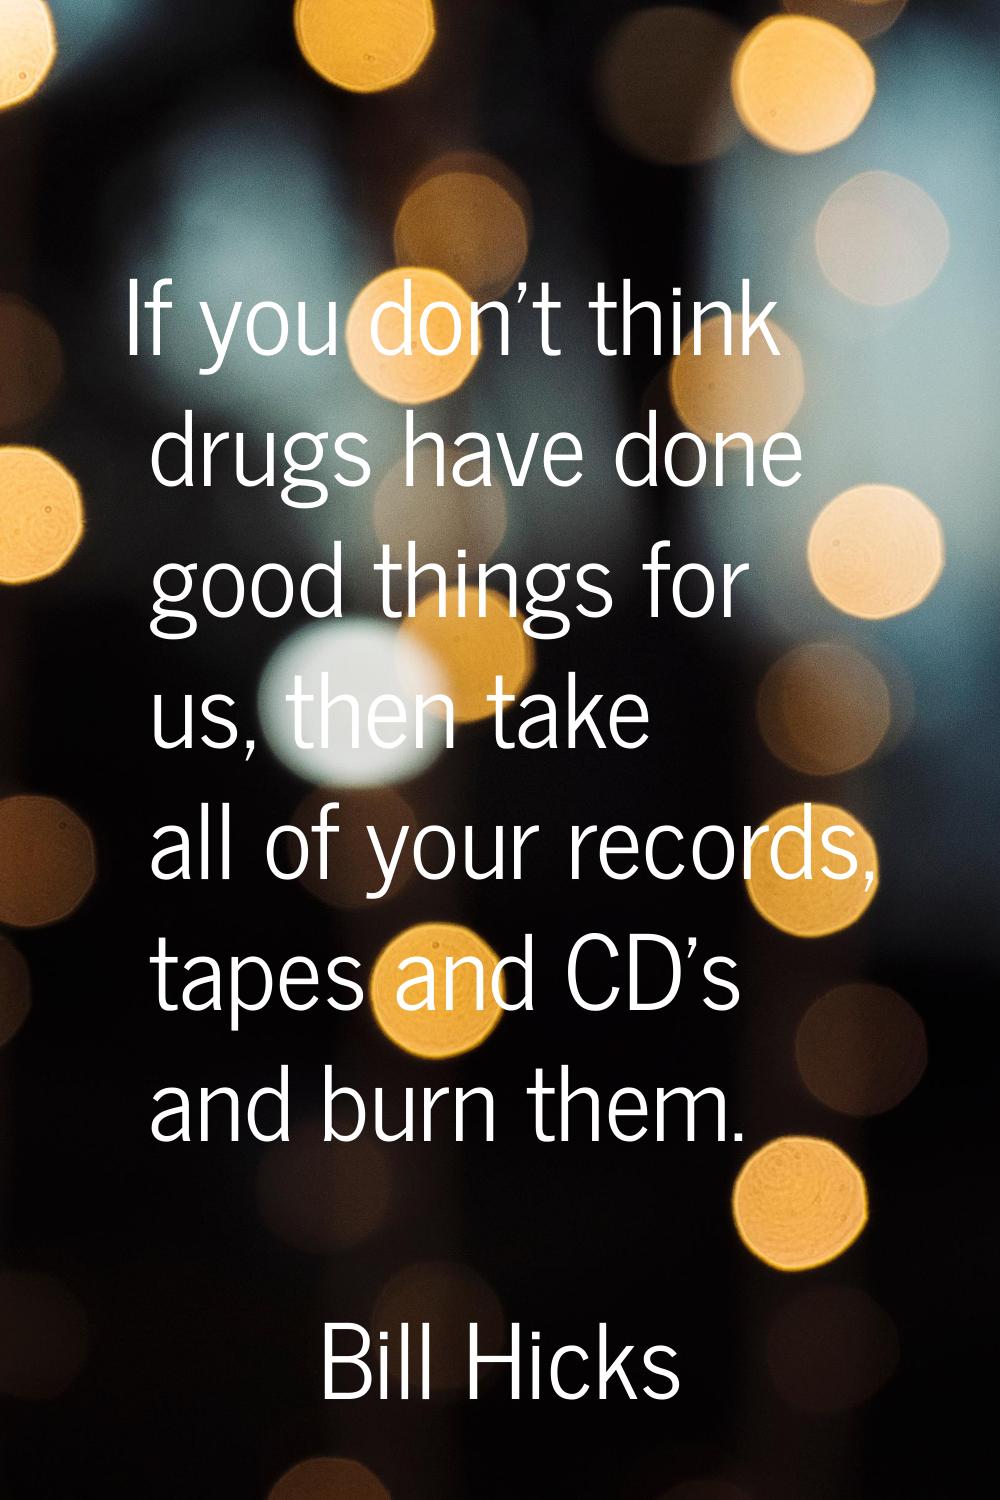 If you don't think drugs have done good things for us, then take all of your records, tapes and CD'